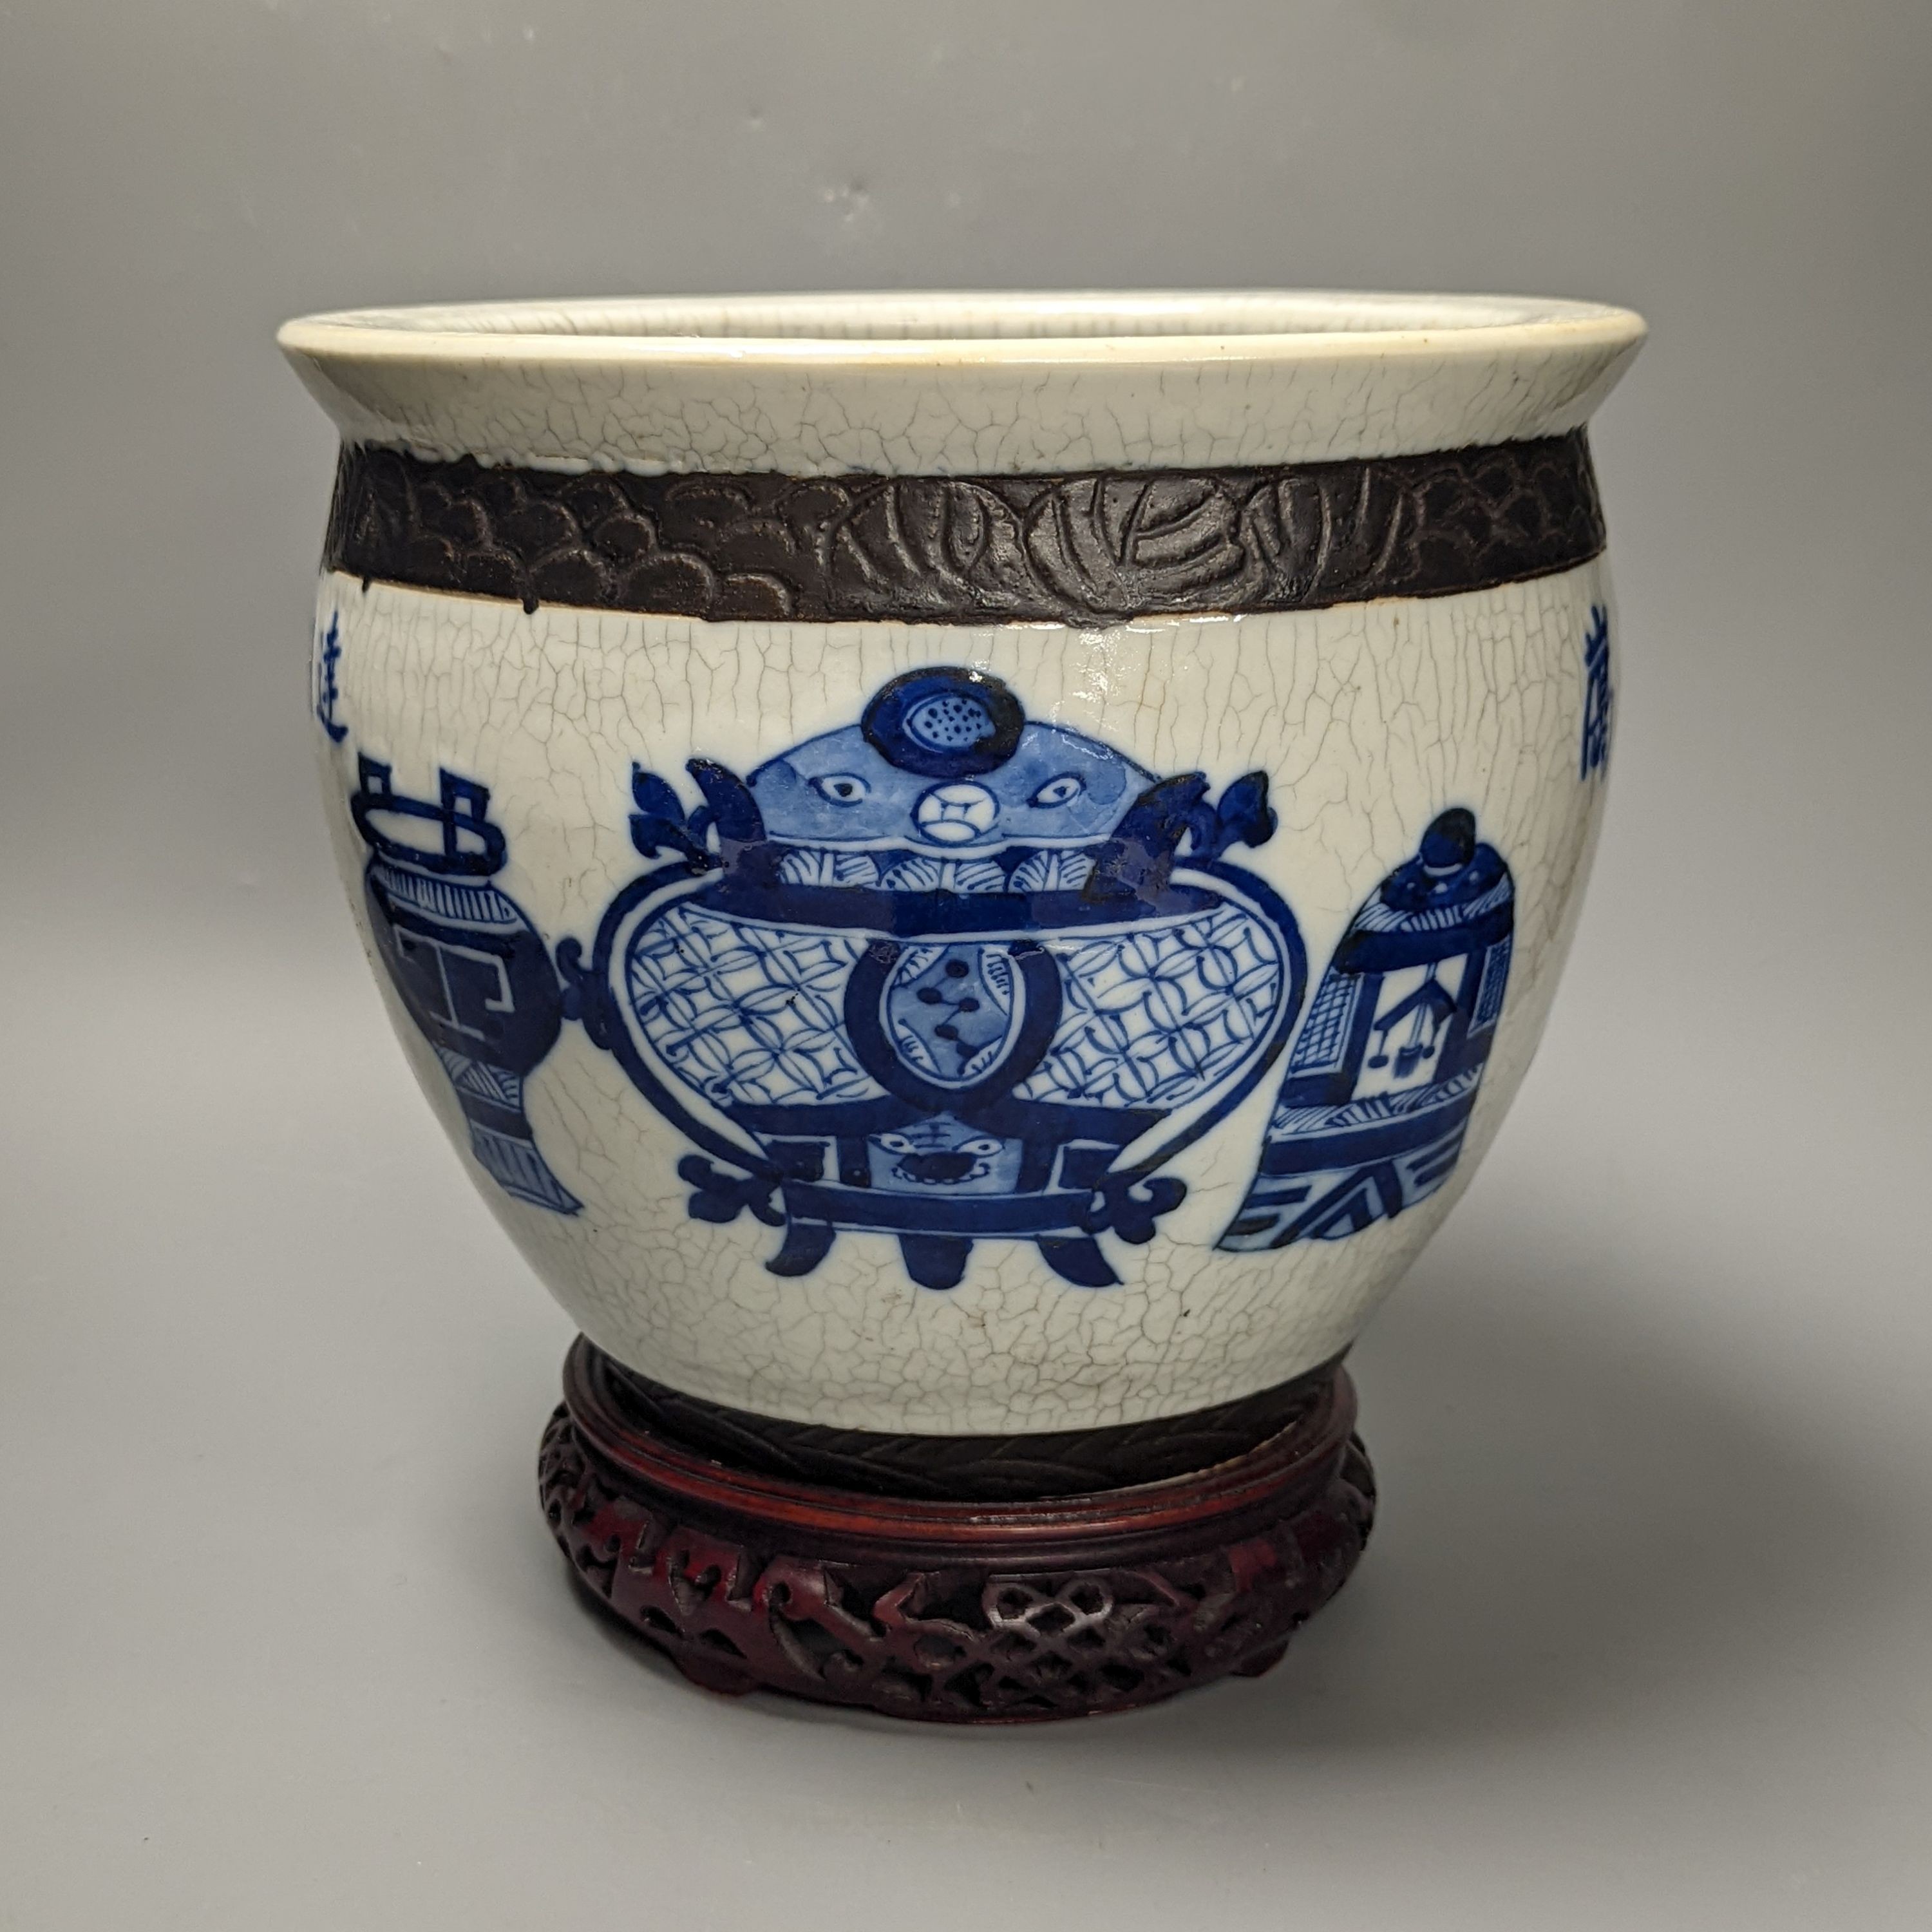 A Chinese blue and white crackle glazed jardiniere, early 20th century, wood stand. Total height 27cm